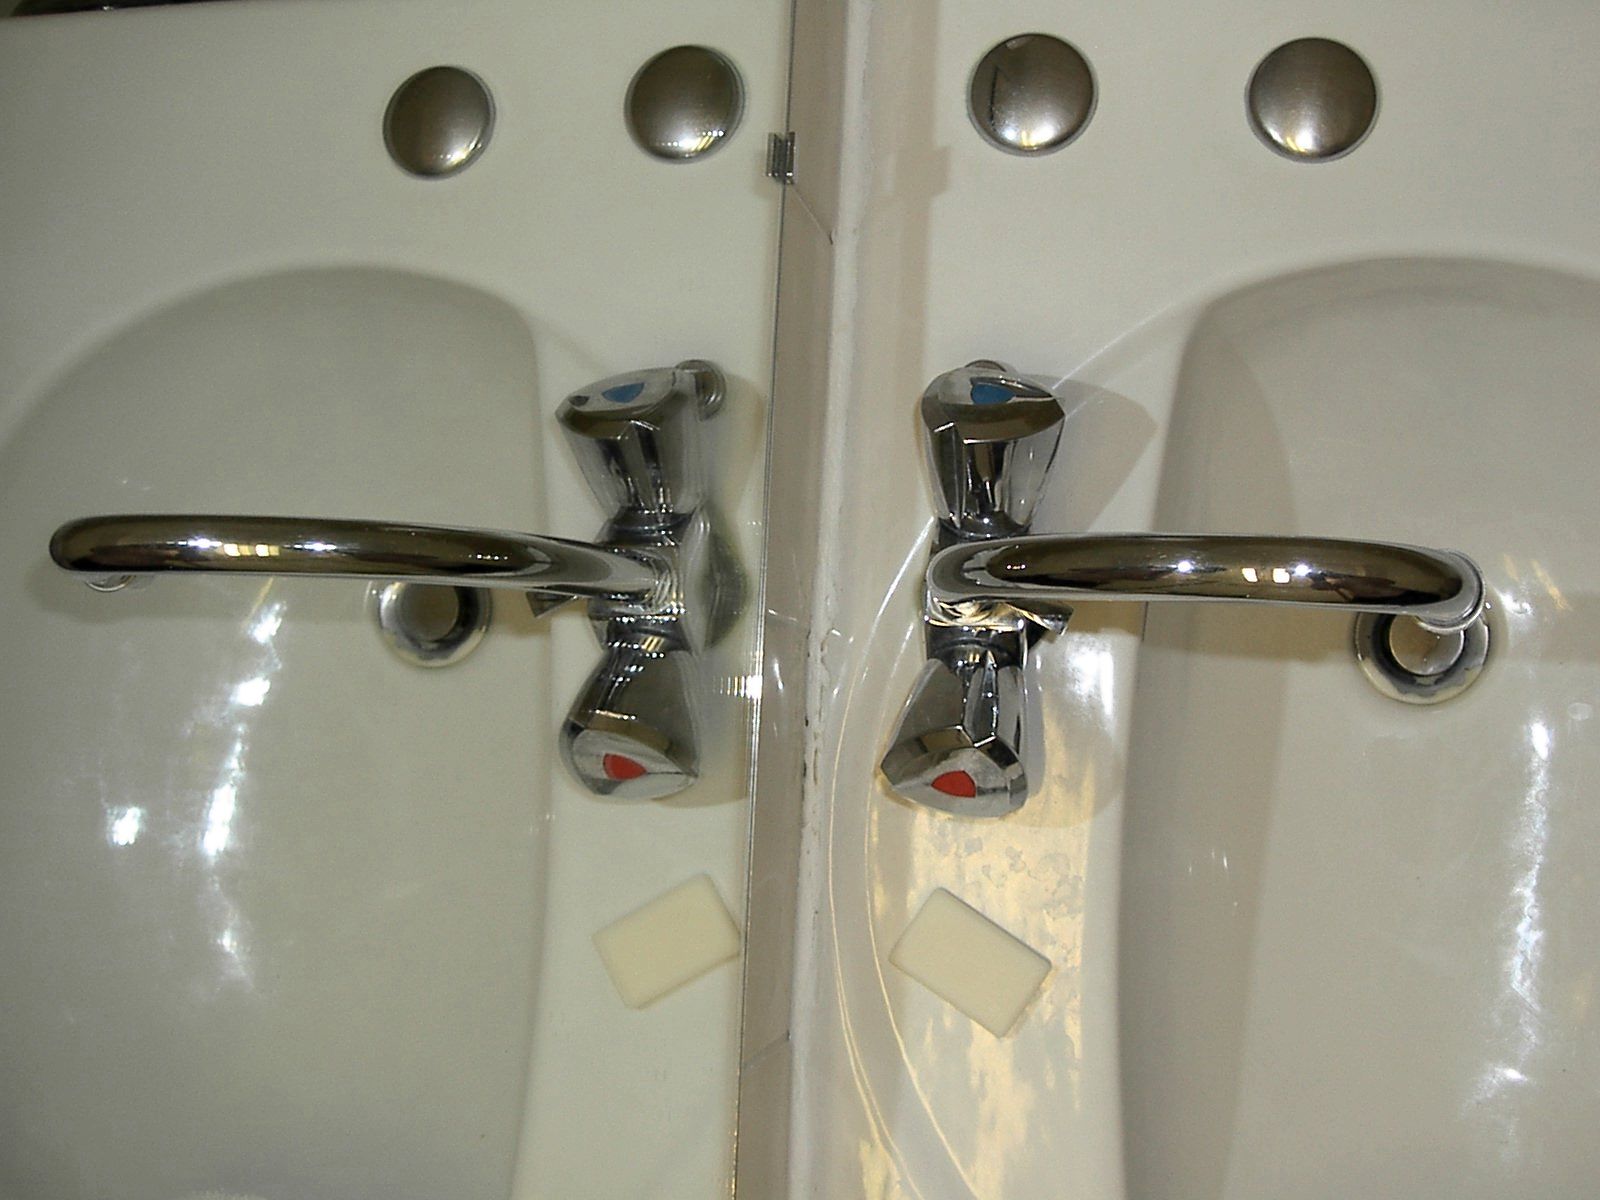 two old and modern looking sinks made of white material